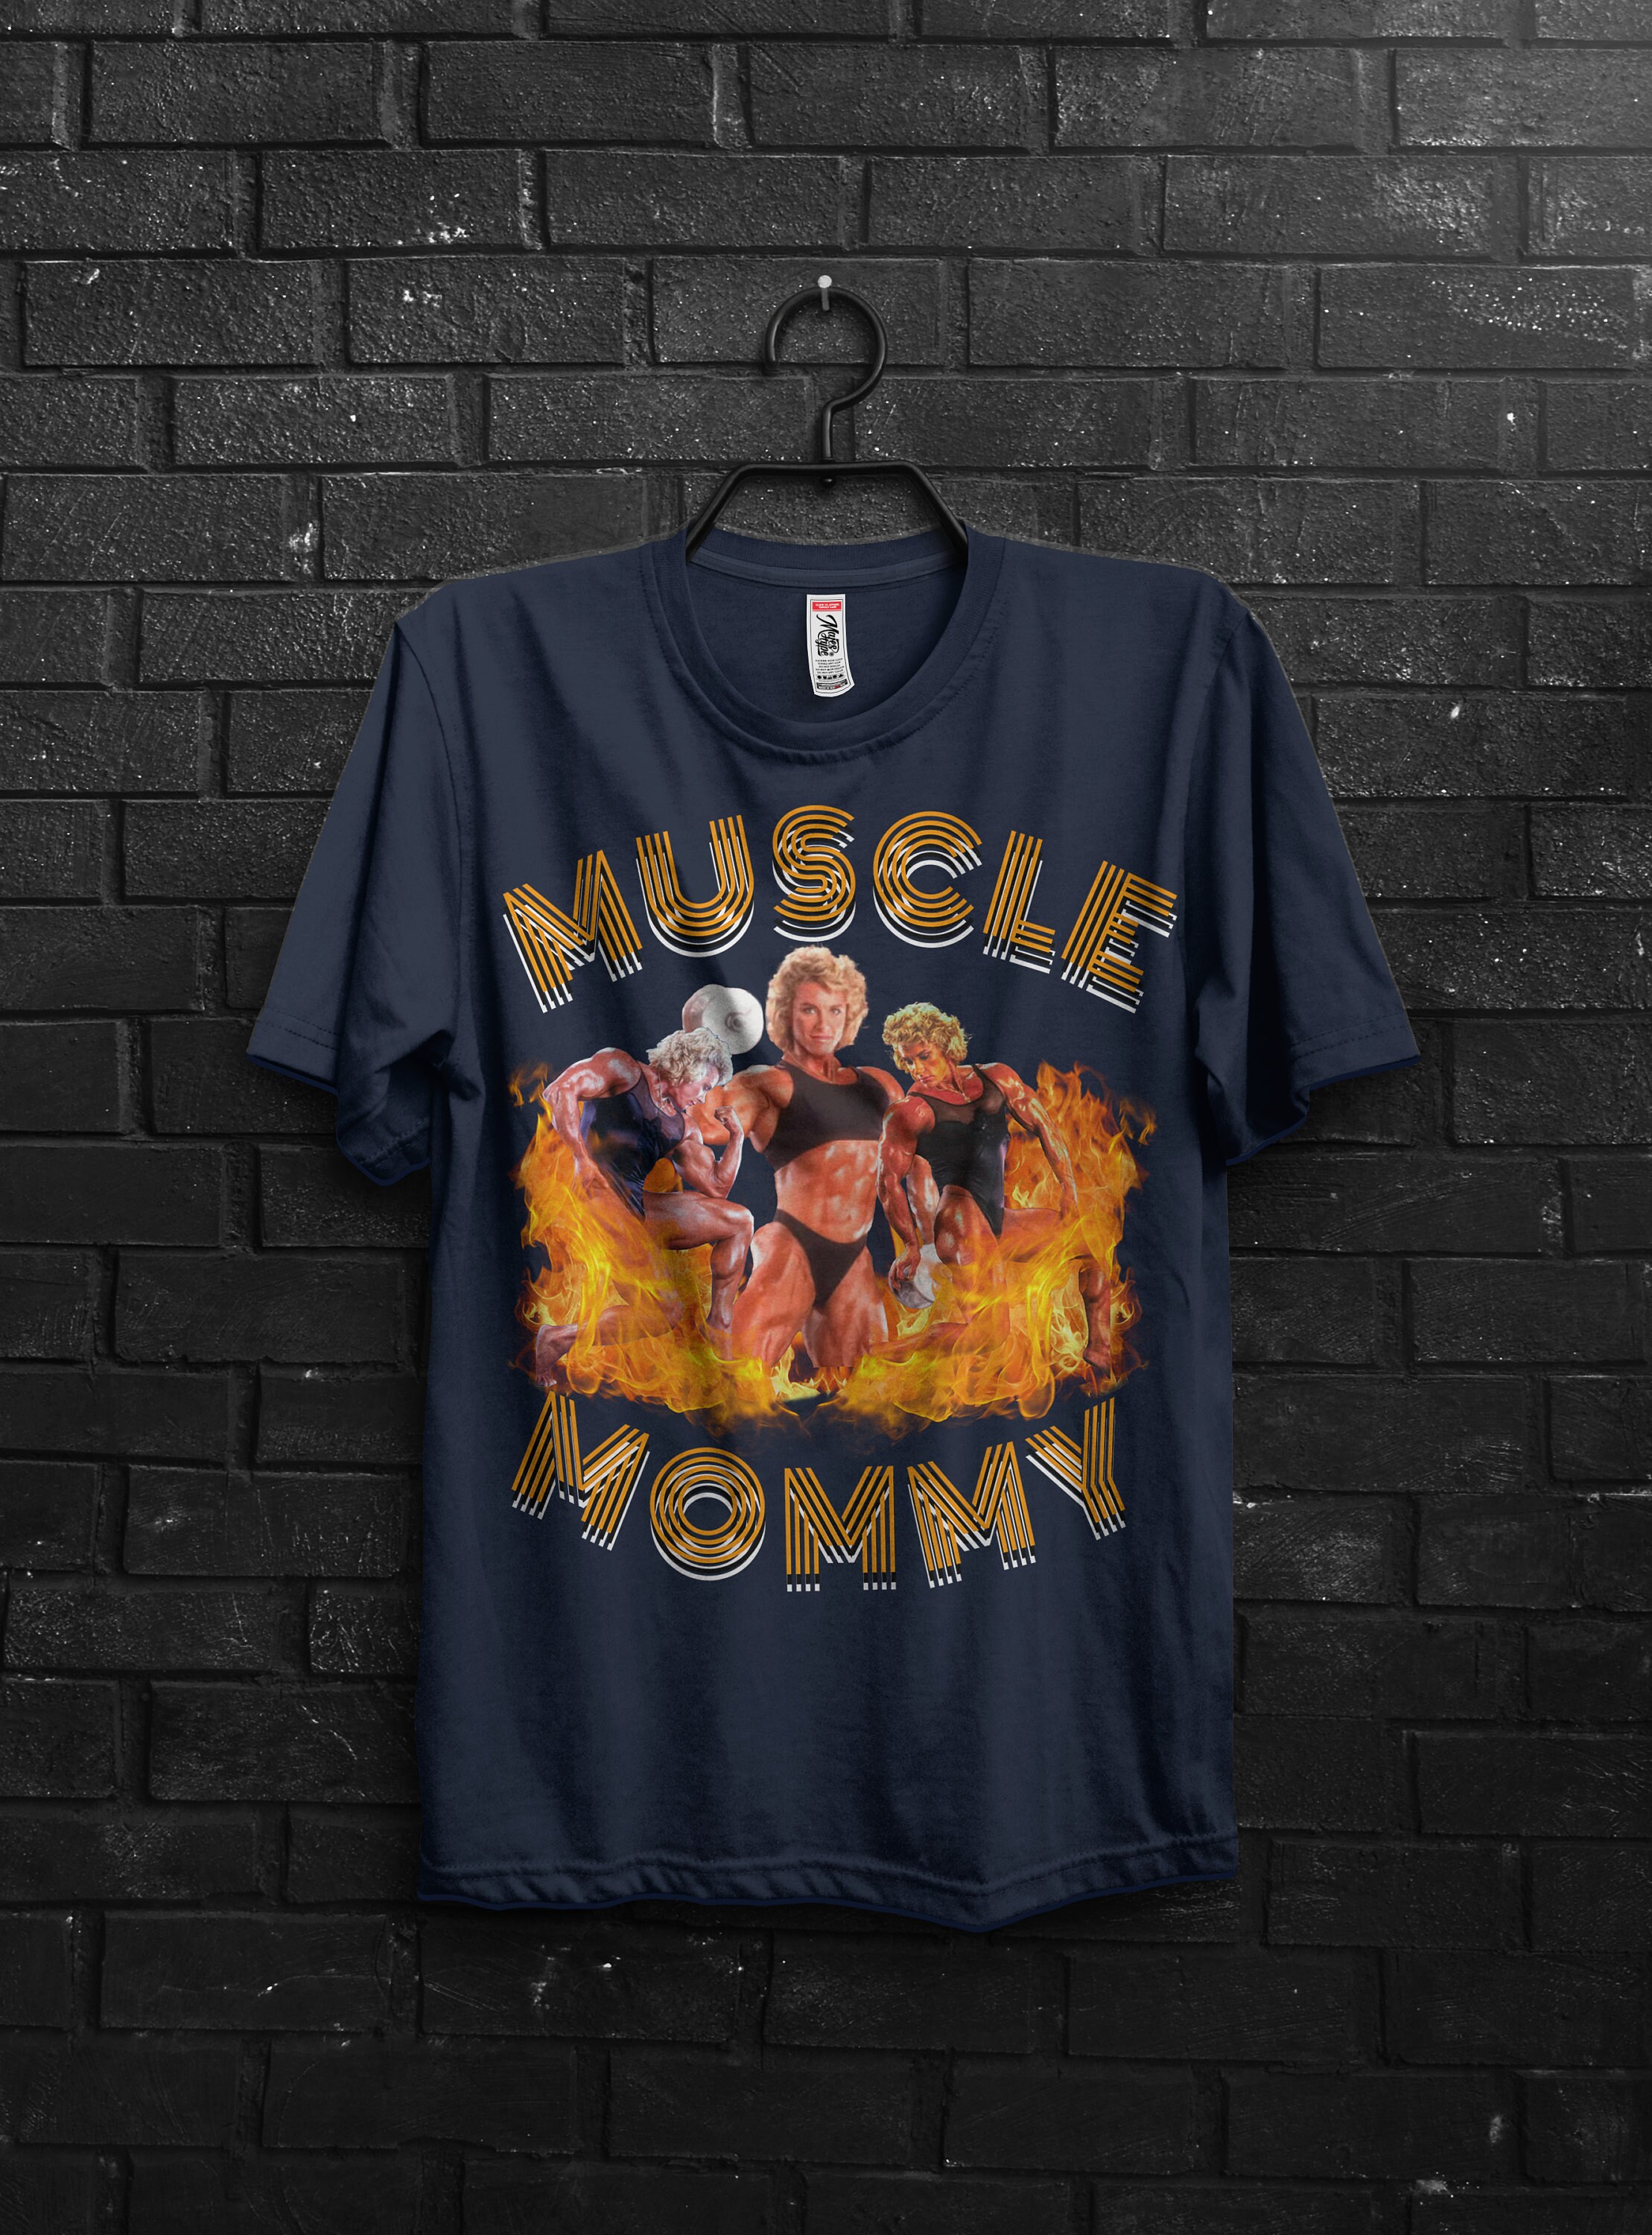 Retro Muscle Mommy Gym T shirt,Oversized Fitness Shirt for Women,Vintage Muscle Mommy Gym Shirt,Bodybuilder and Weightlifting Gift,Gym Mommy 1476274208